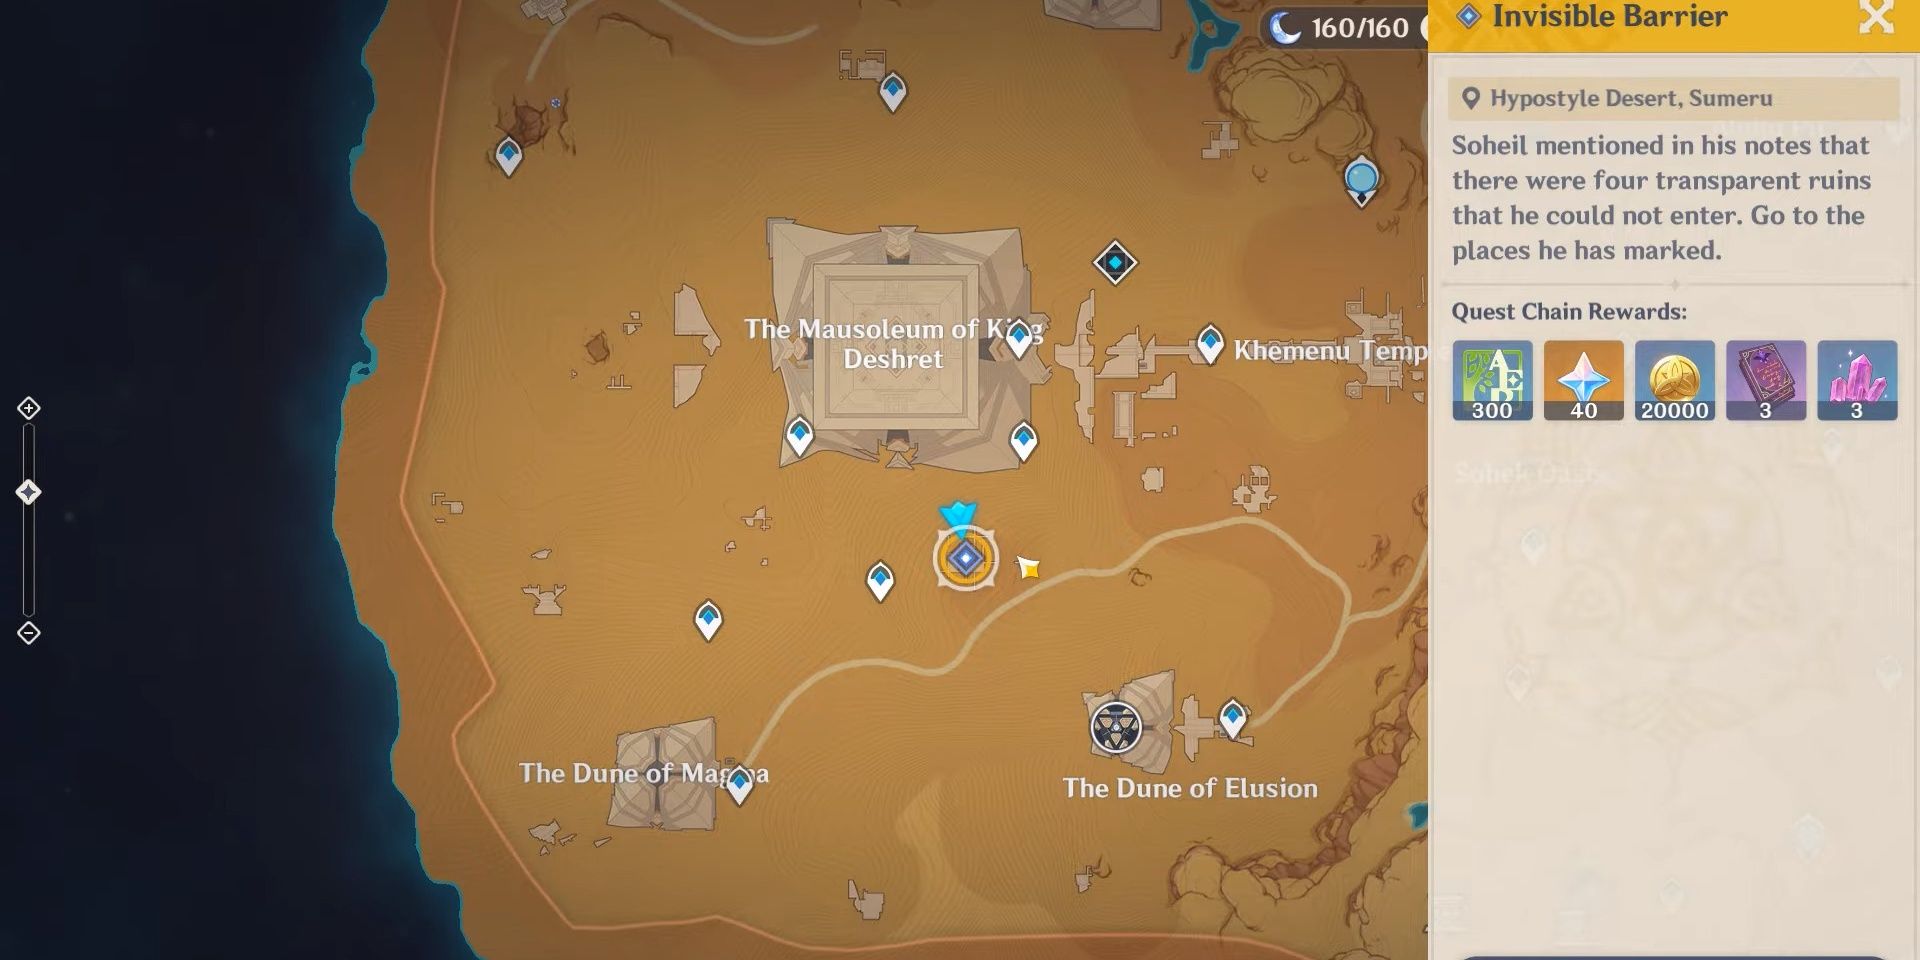 Image of the fourth location of the Transparent Ruins on the map in Genshin Impact.